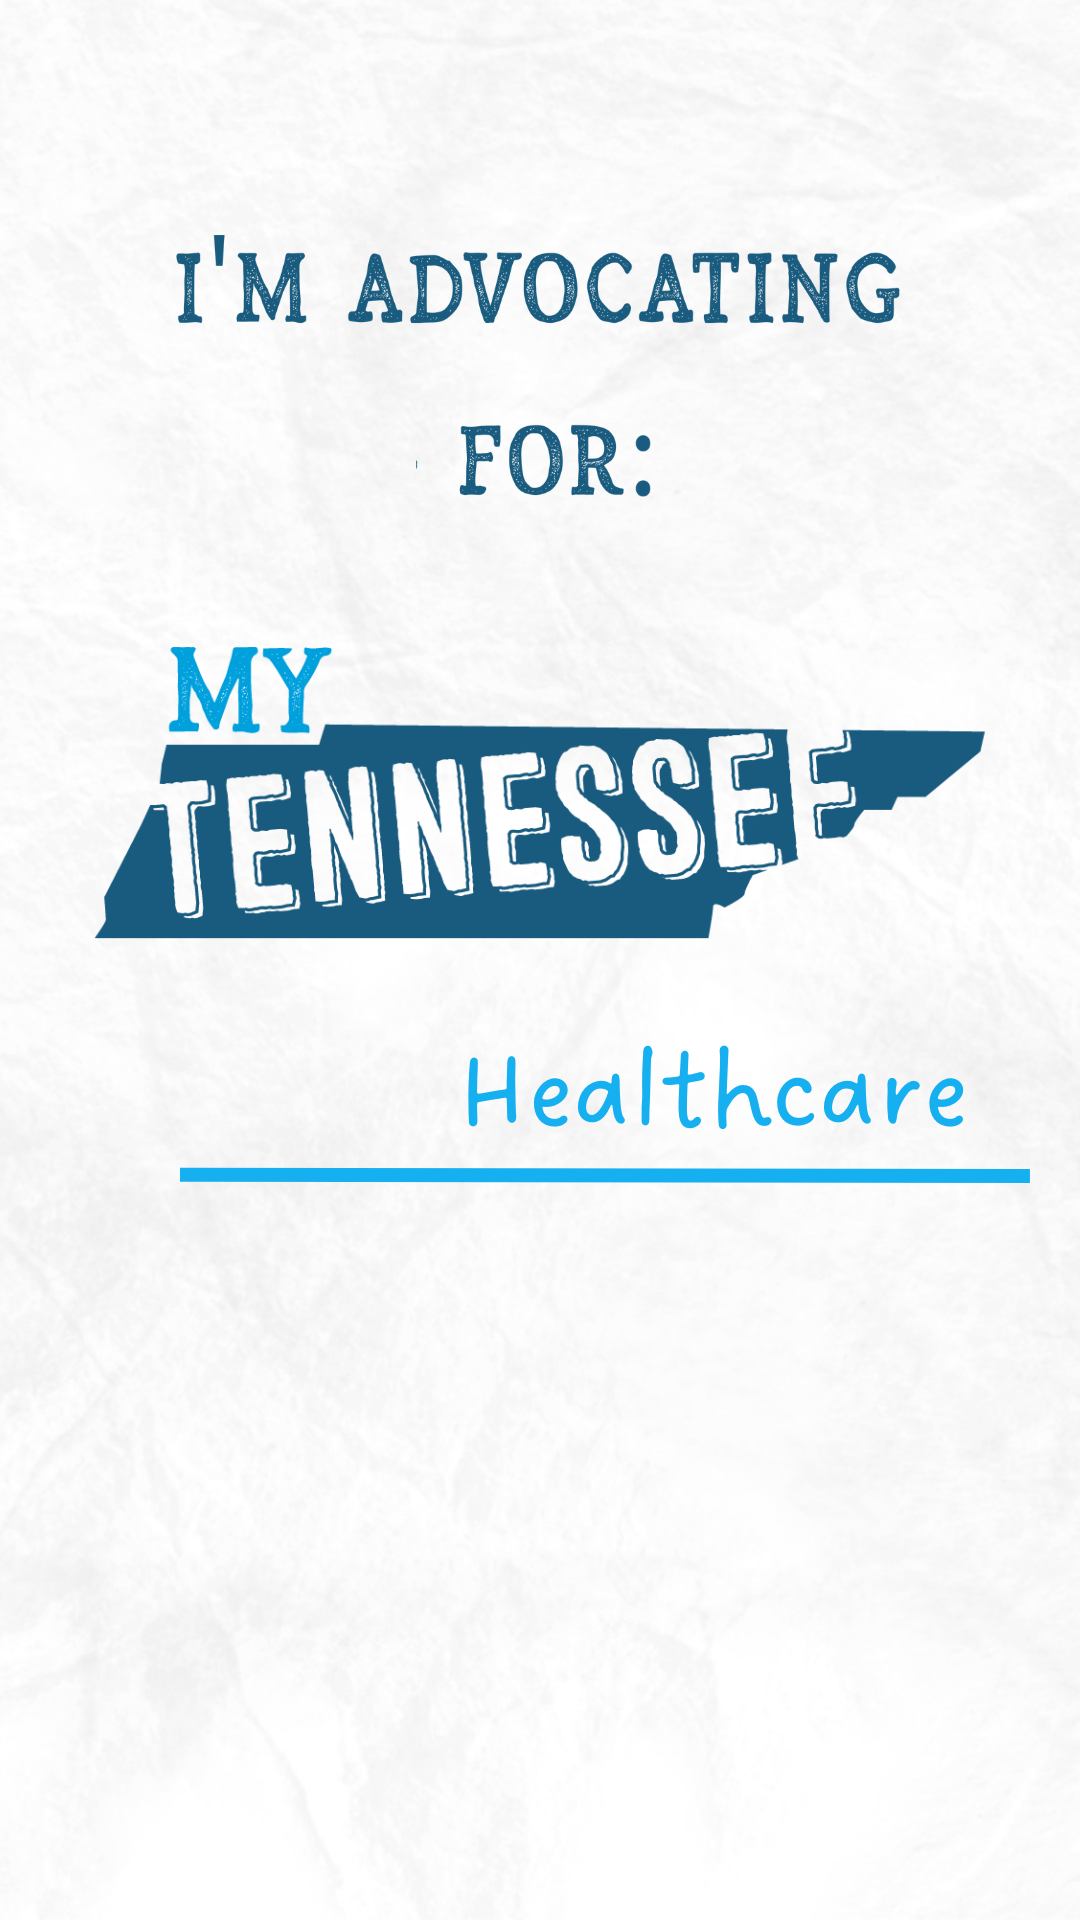 My Tennessee Life Social Media Template that reads "I'm advocating for my Tennessee healthcare"